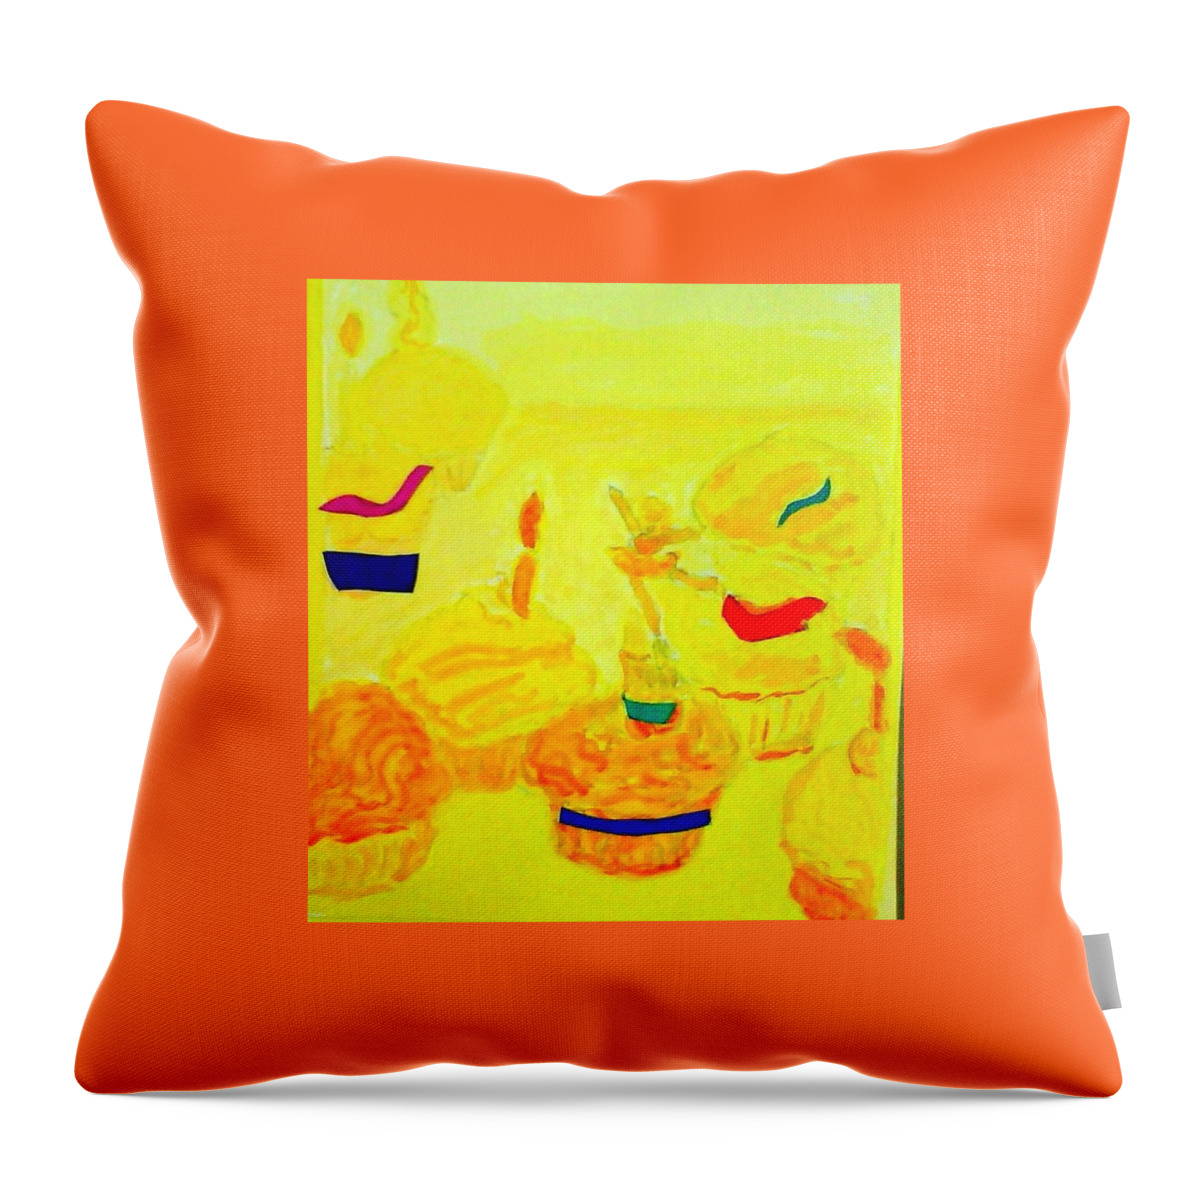 Yellow Cupcakes Throw Pillow featuring the painting Yellow Cupcakes by Suzanne Berthier